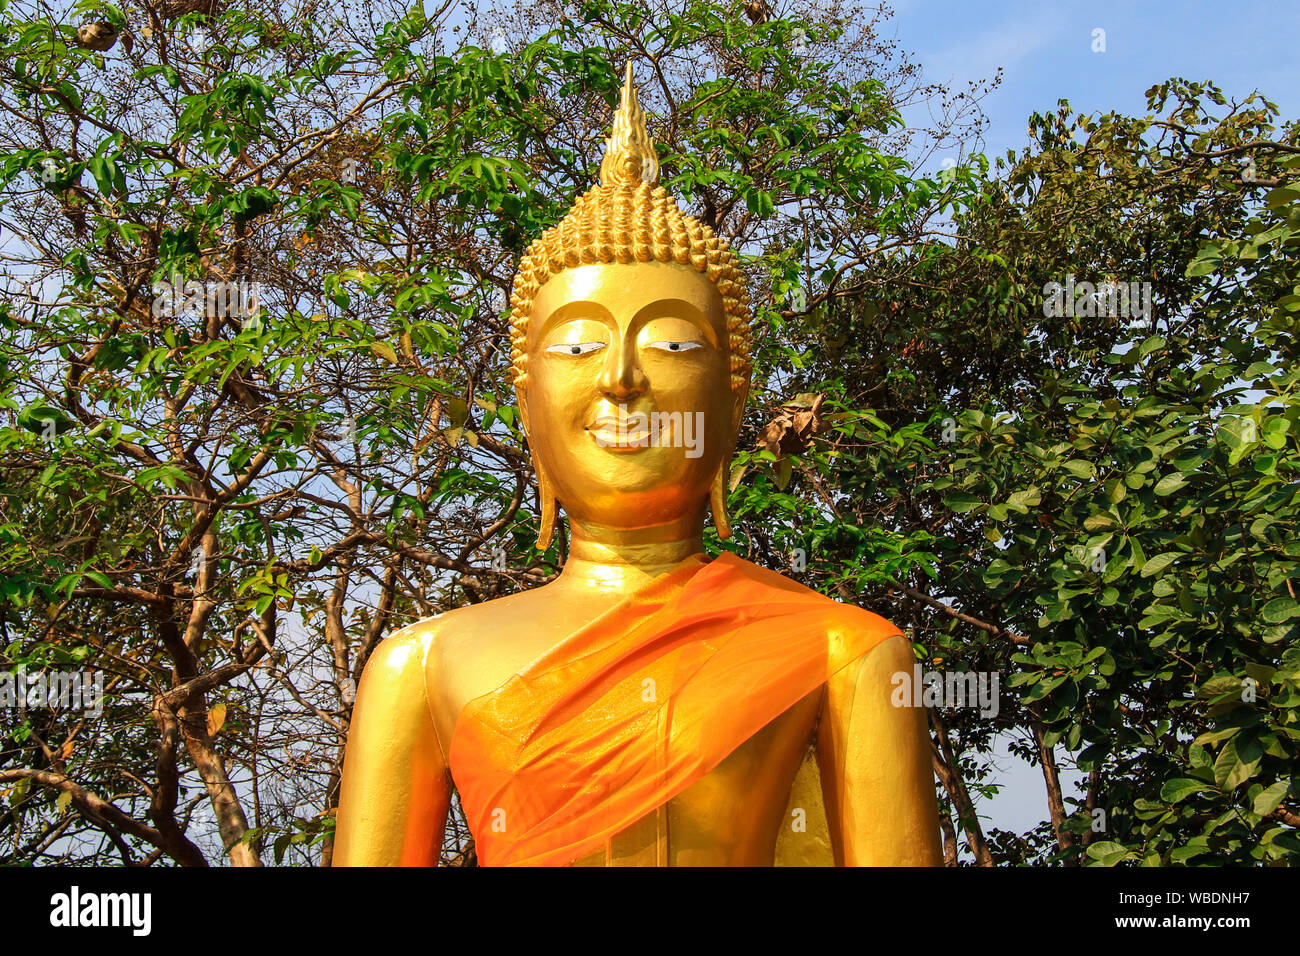 Head of the Golden Buddha in a Thai Buddhist temple, a religious symbol in Thailand, Asia, Asian religion and culture. Stock Photo